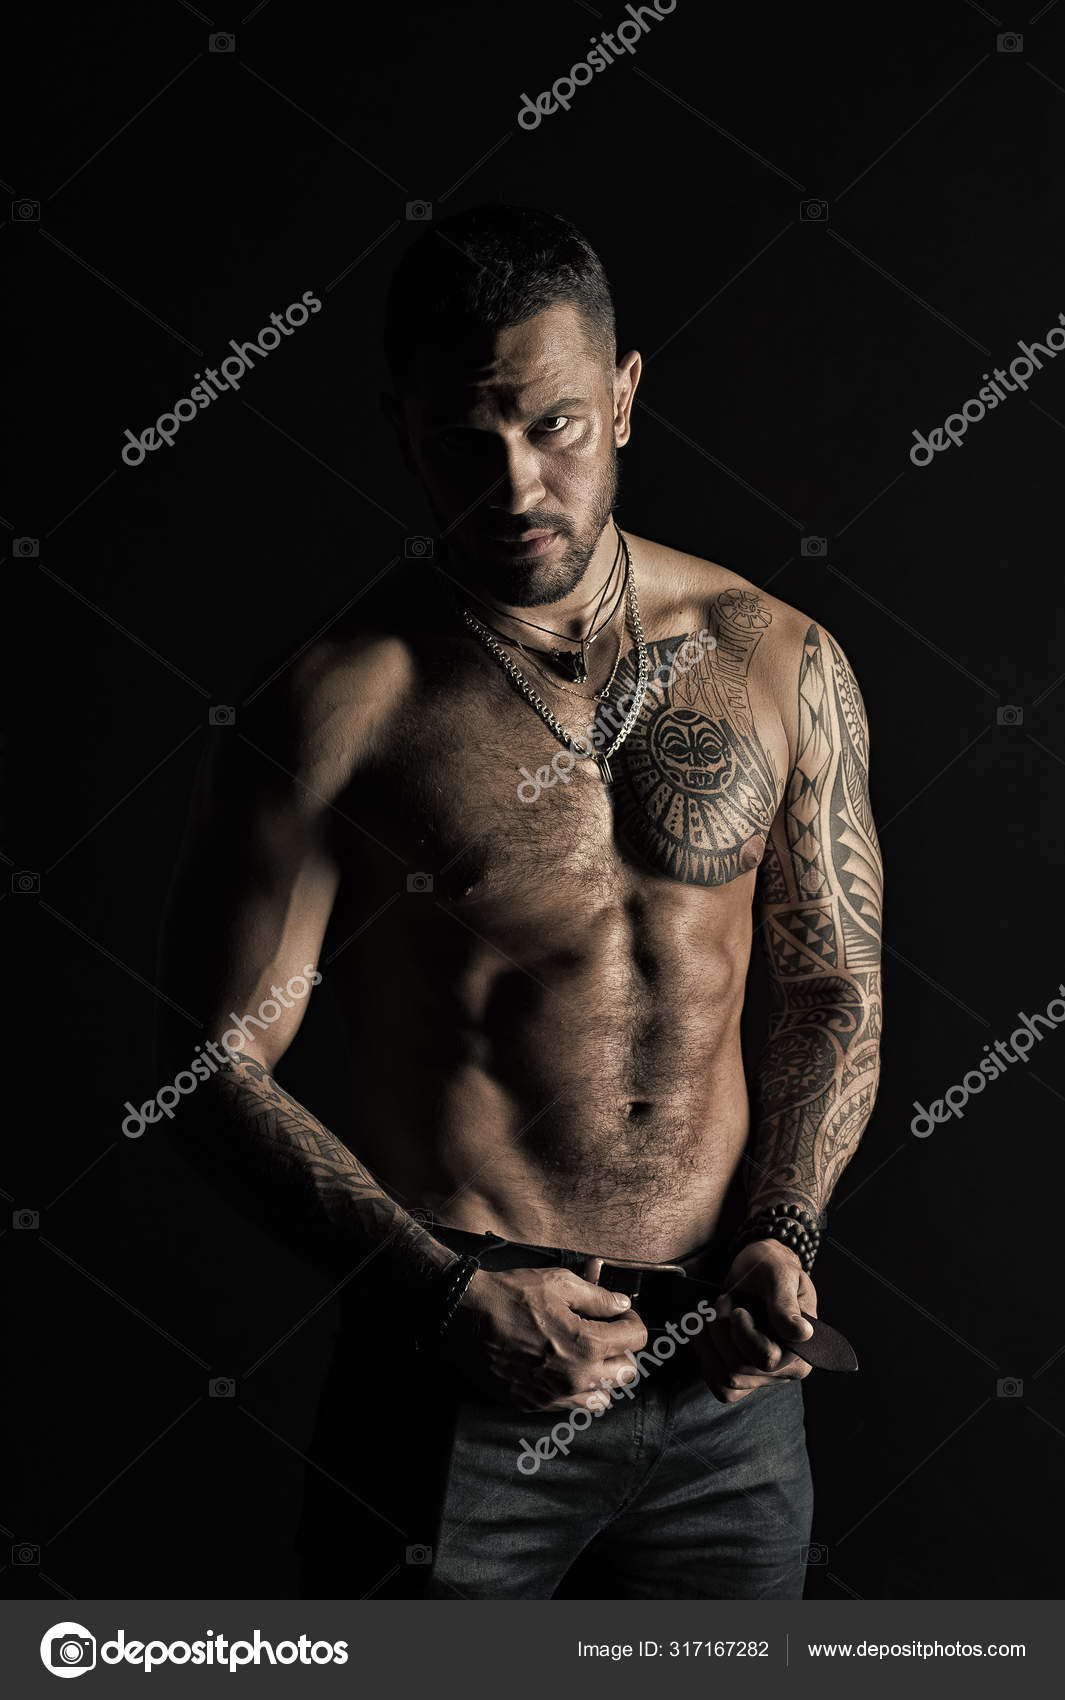 Bearded man shirtless with fit torso. Man with tattoo design on skin.  Fashion model buckle leather